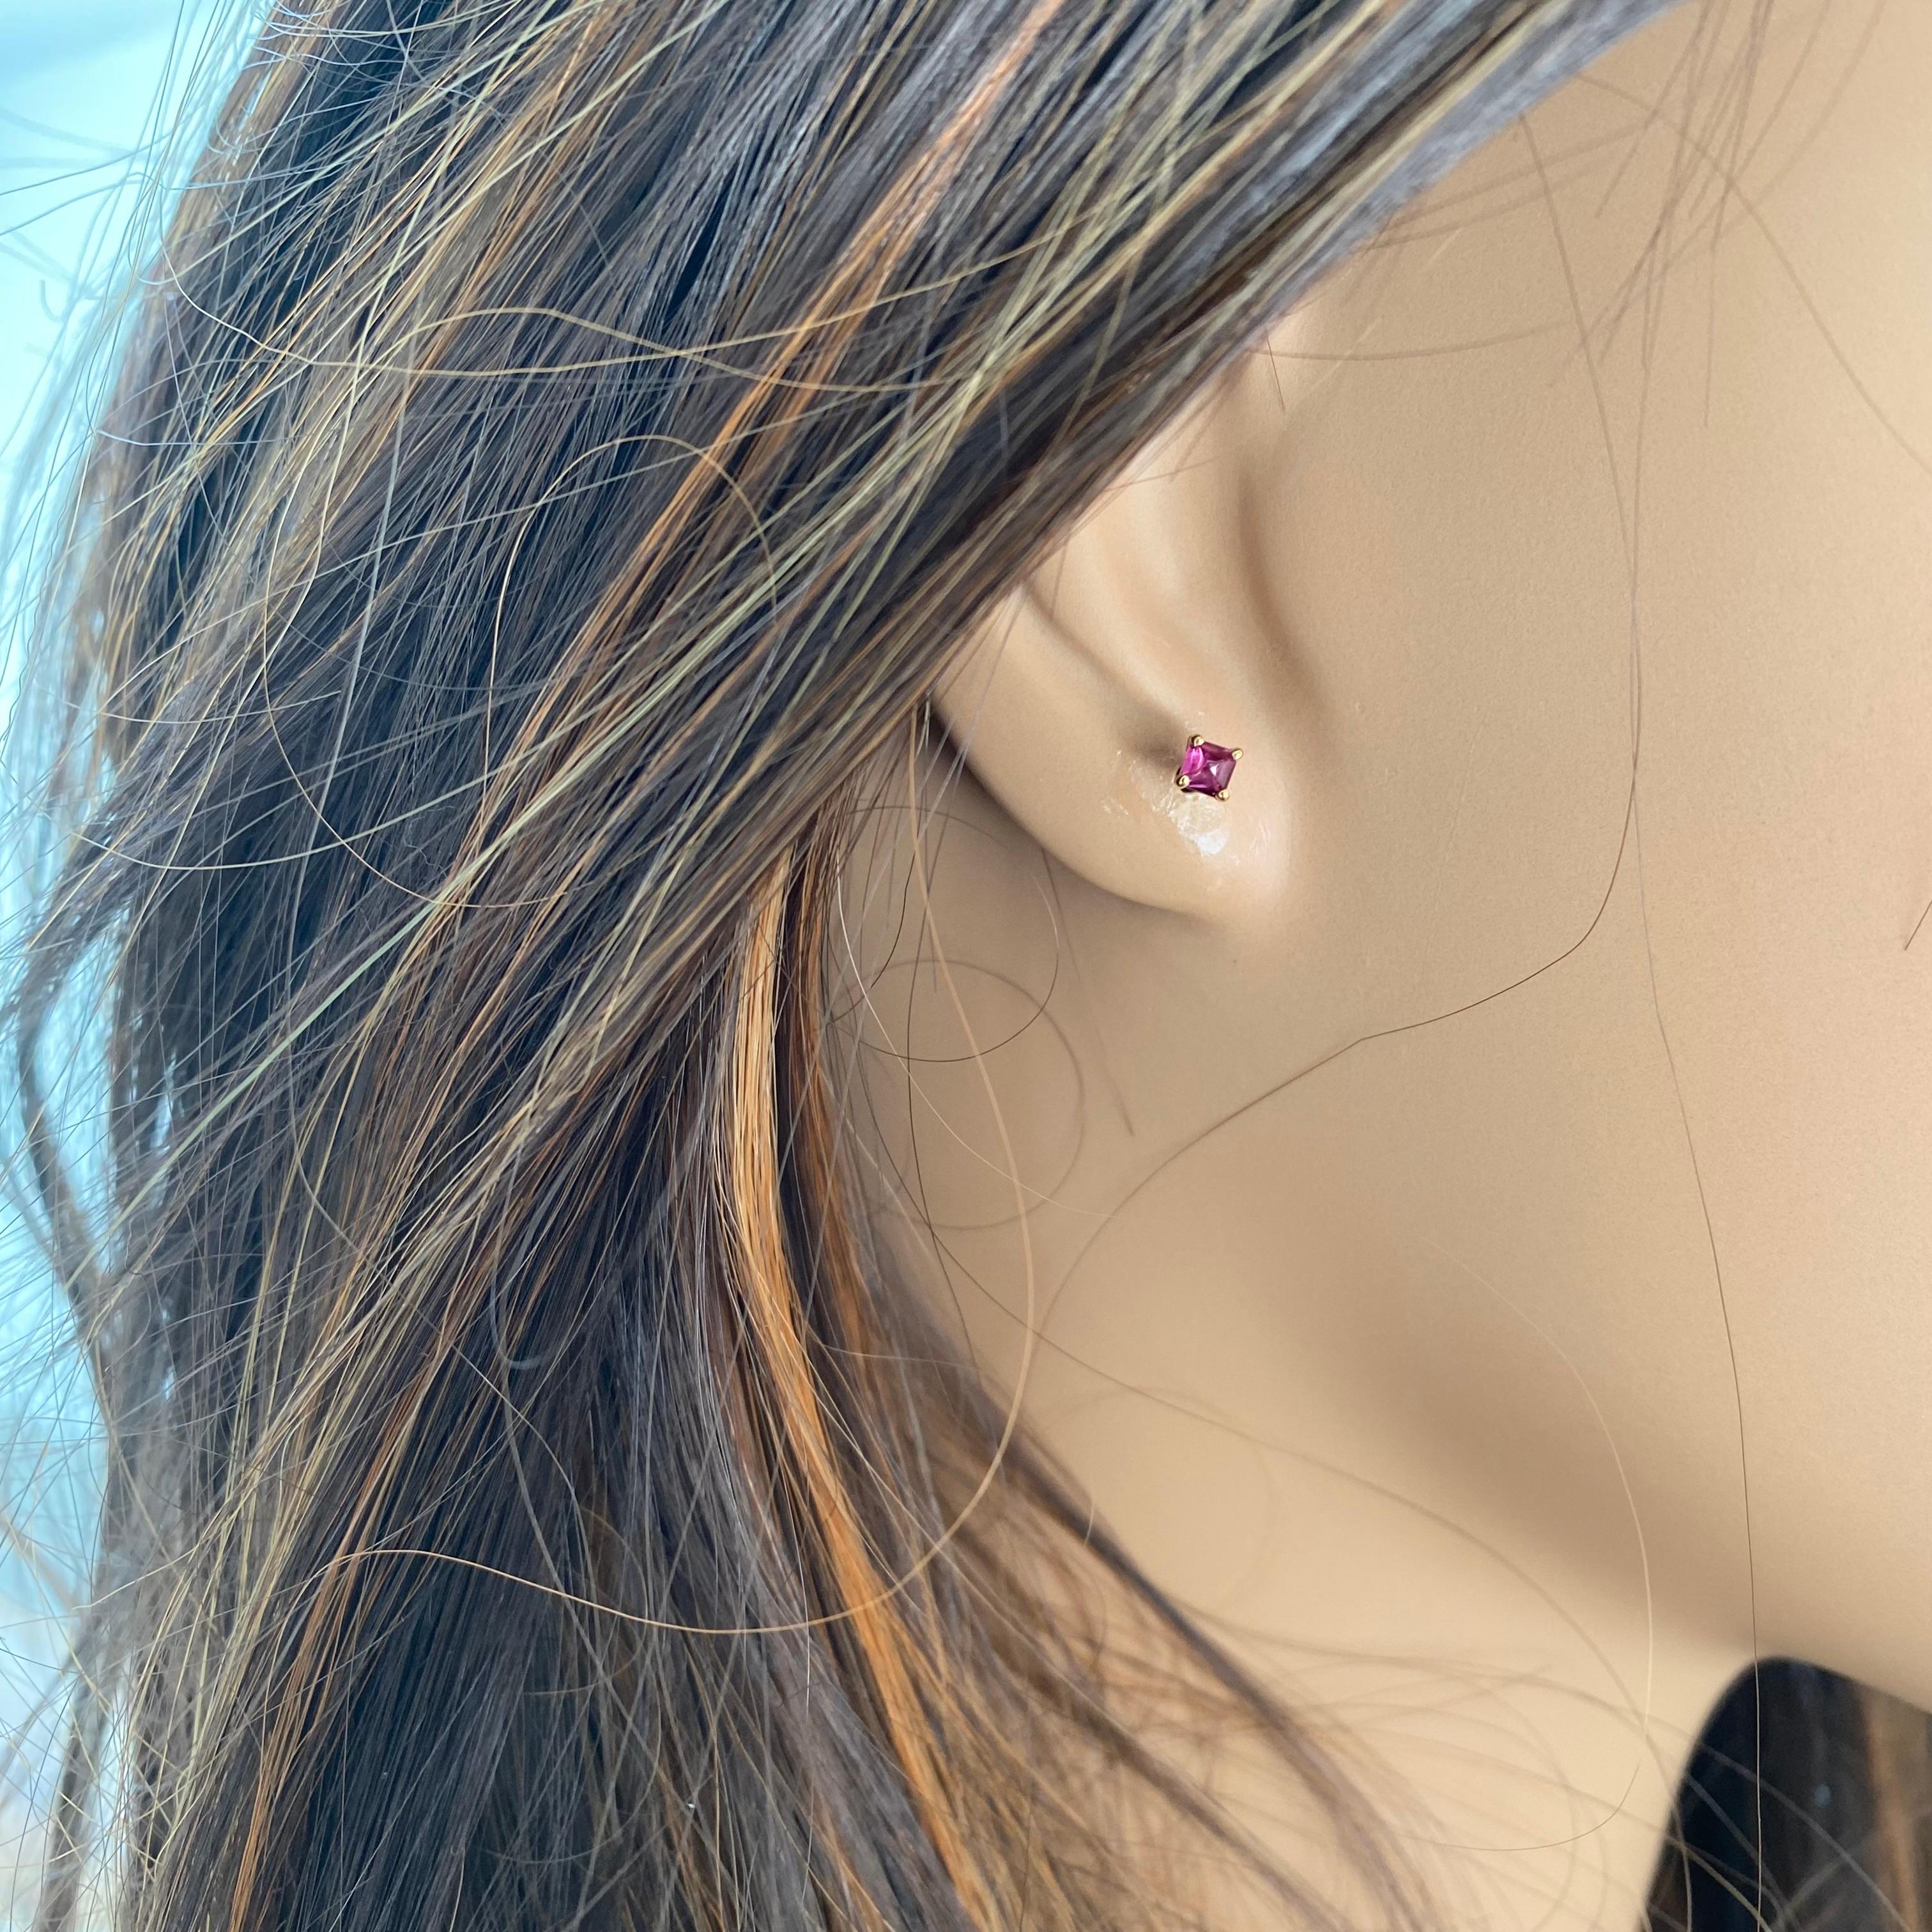 These Sugarloaf Burma Cabochon Ruby stud earrings are a stunning addition to any jewelry collection. Each earring features a vibrant 0.25 carat Ruby set in 14 Karat Yellow Gold. The Rubies are elegantly cabochon cut, showcasing their natural beauty